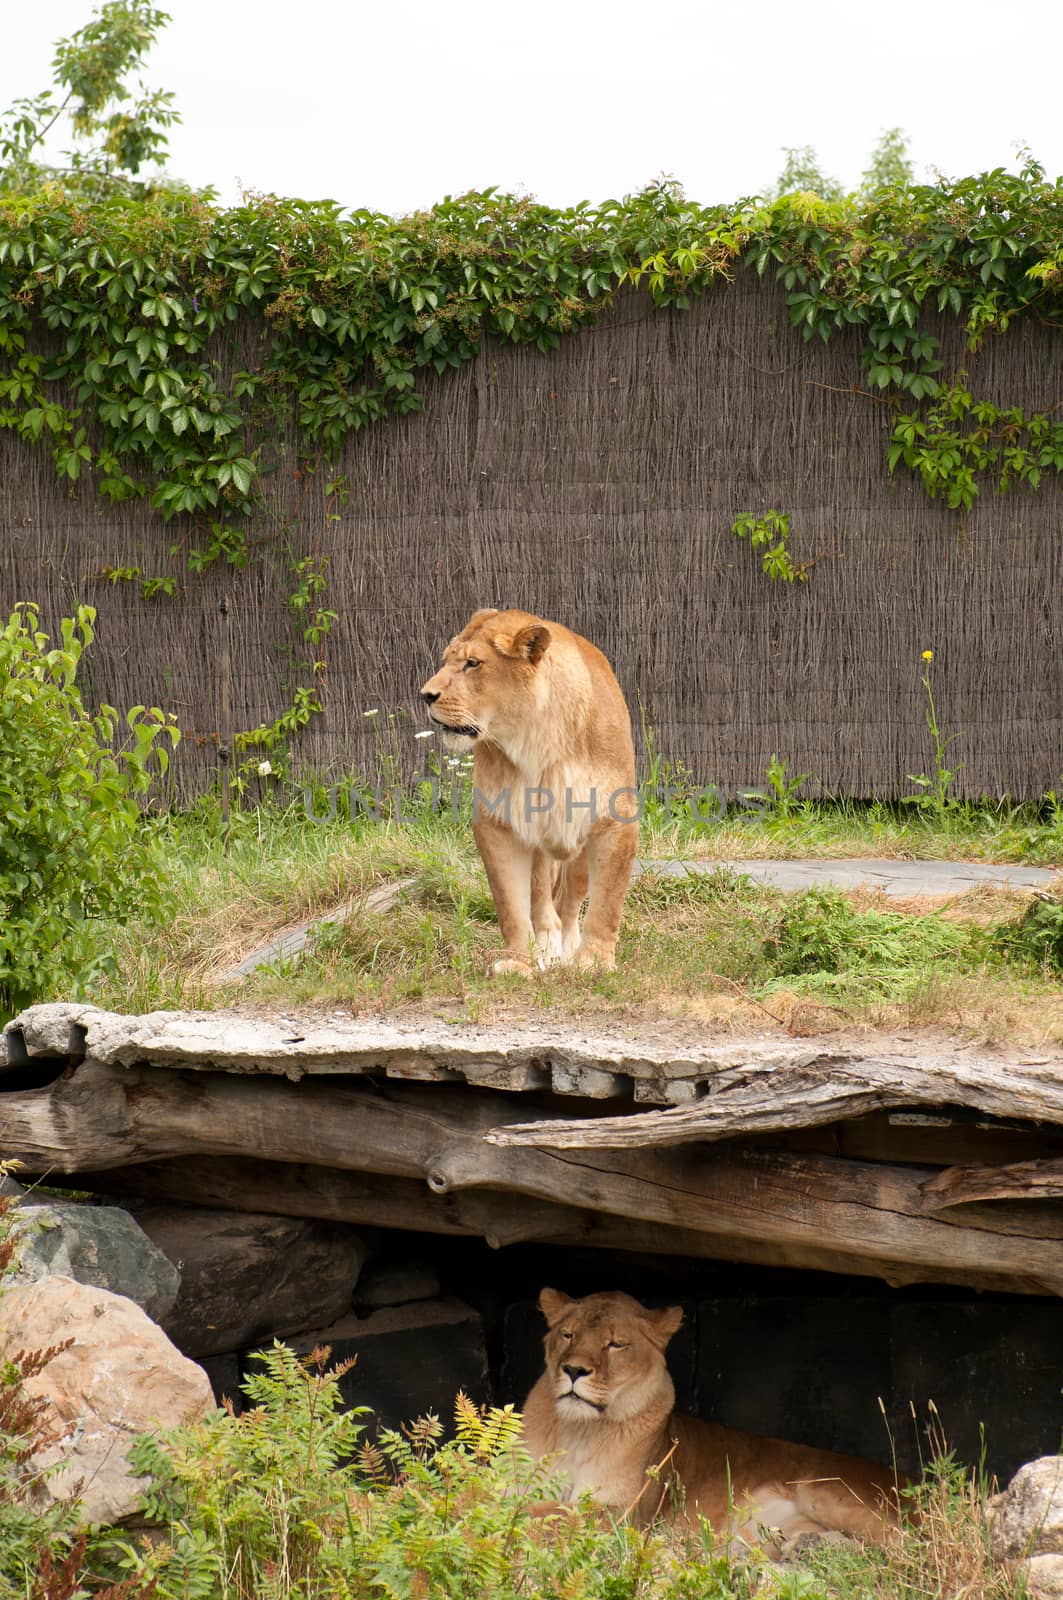 Two lioness at the zoo by daoleduc